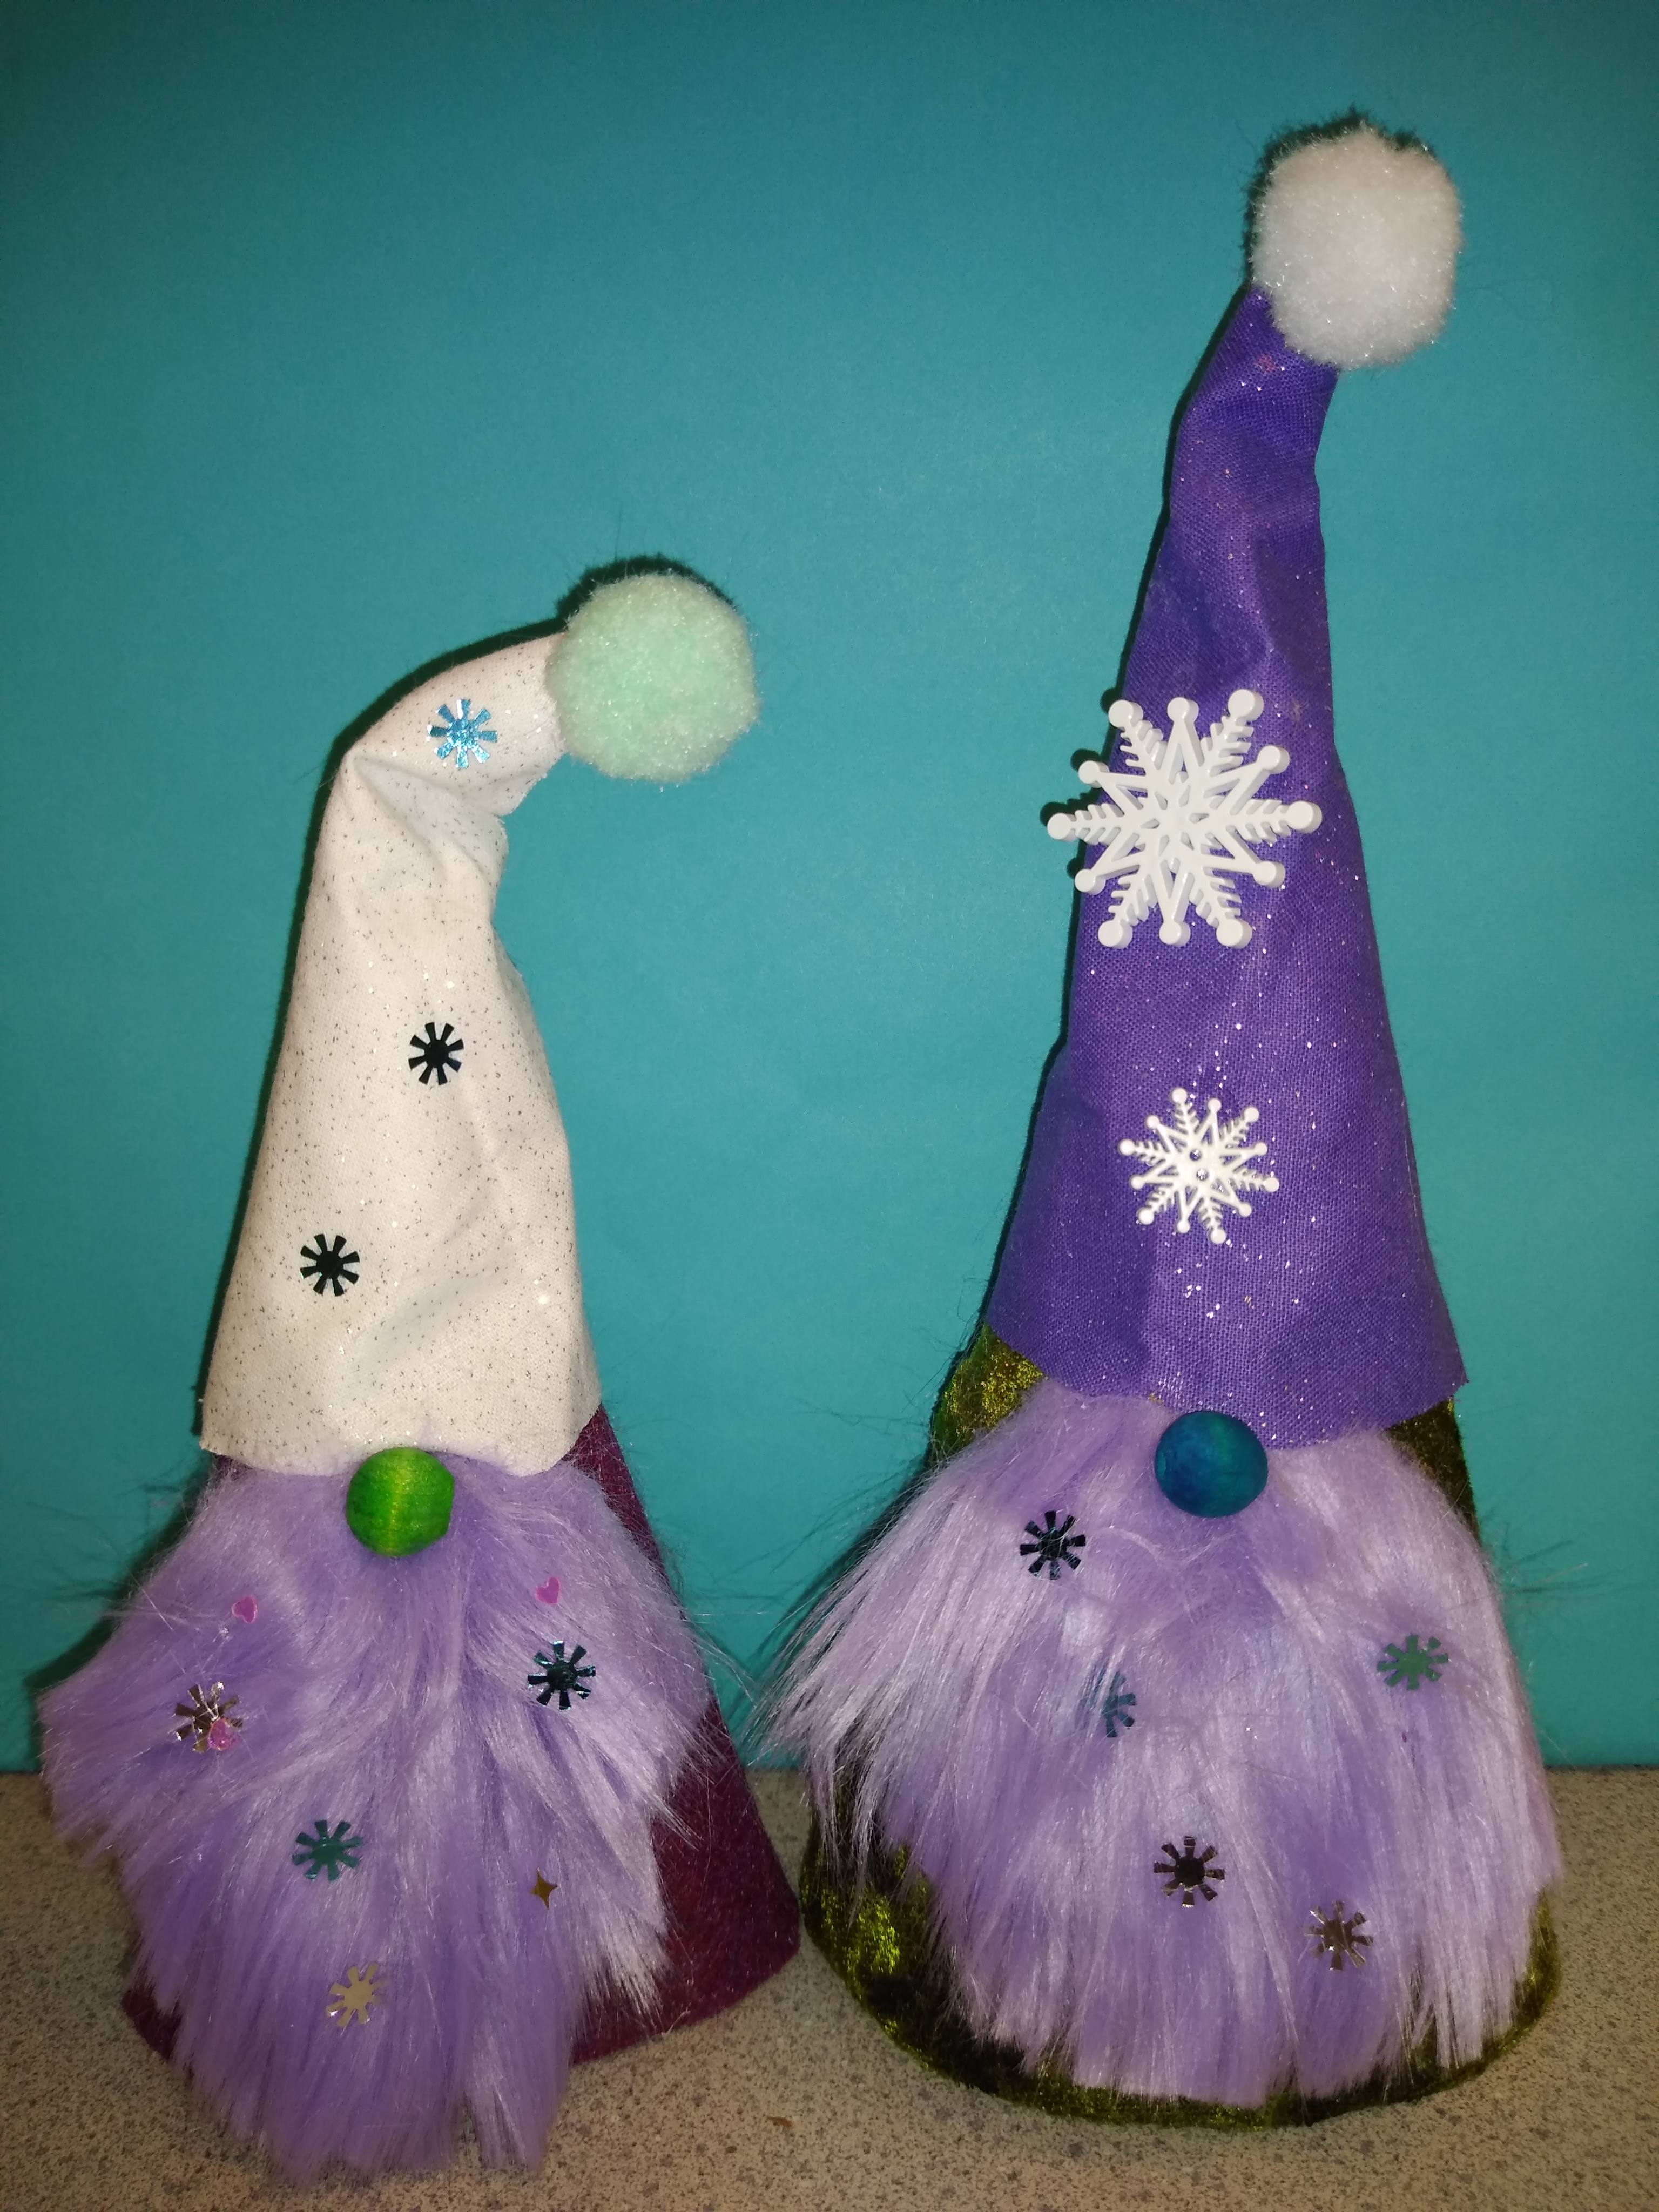 Two gnomes made out of felt and fake fur, decorated in a winter theme.